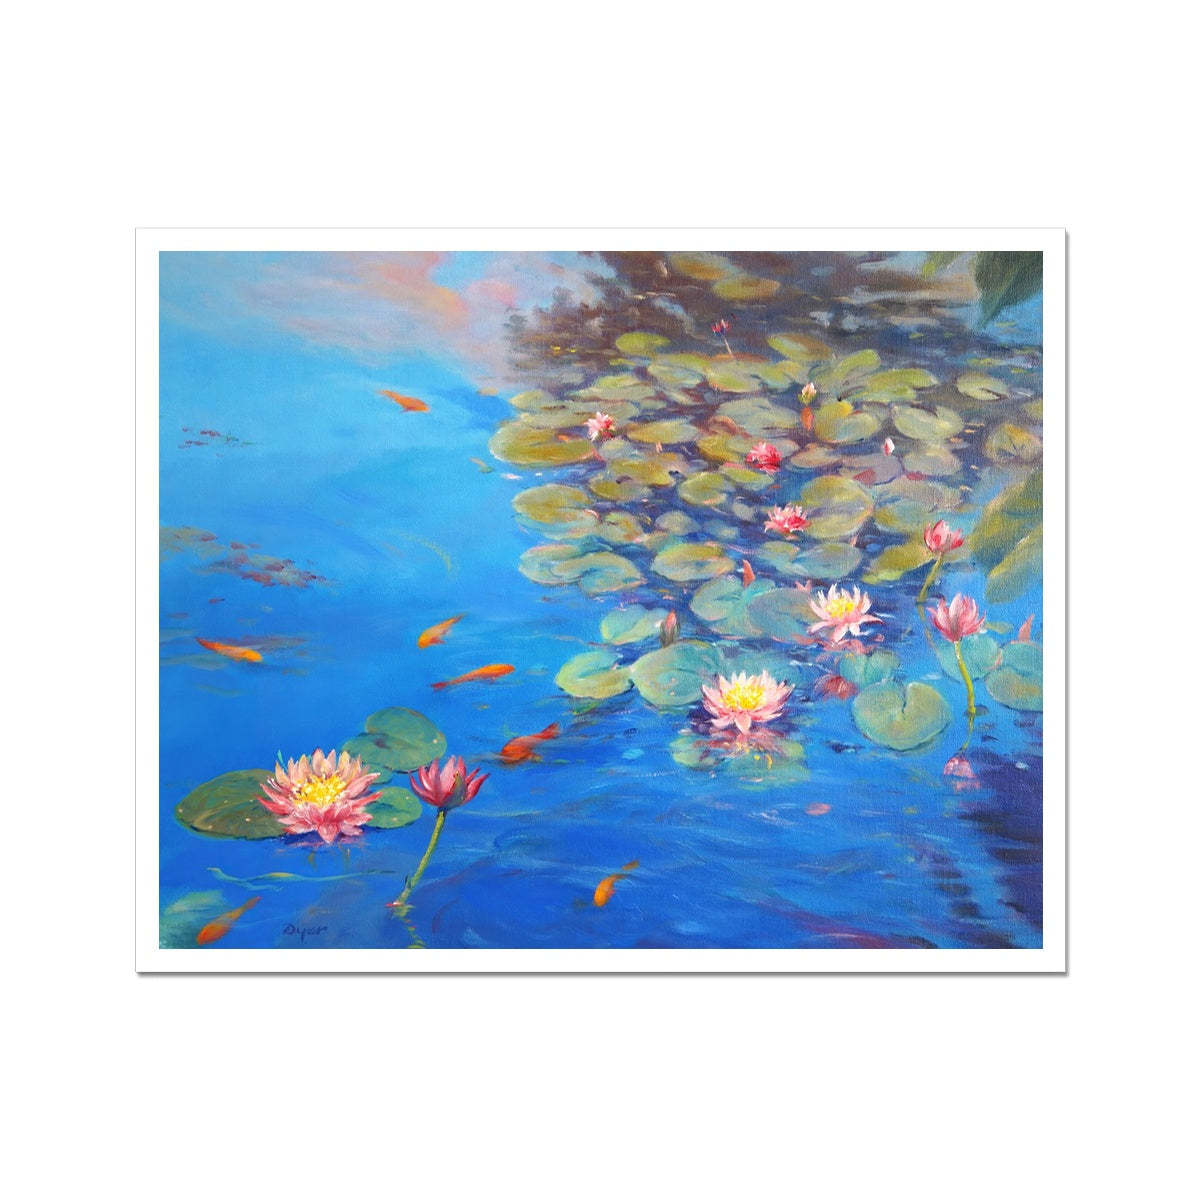 Ted Dyer Museum Quality Open Edition Cornish Art Print. &#39;Water lilies and Sky Reflections, Kimberley Park Pond, Falmouth&#39;. Cornwall Art Gallery